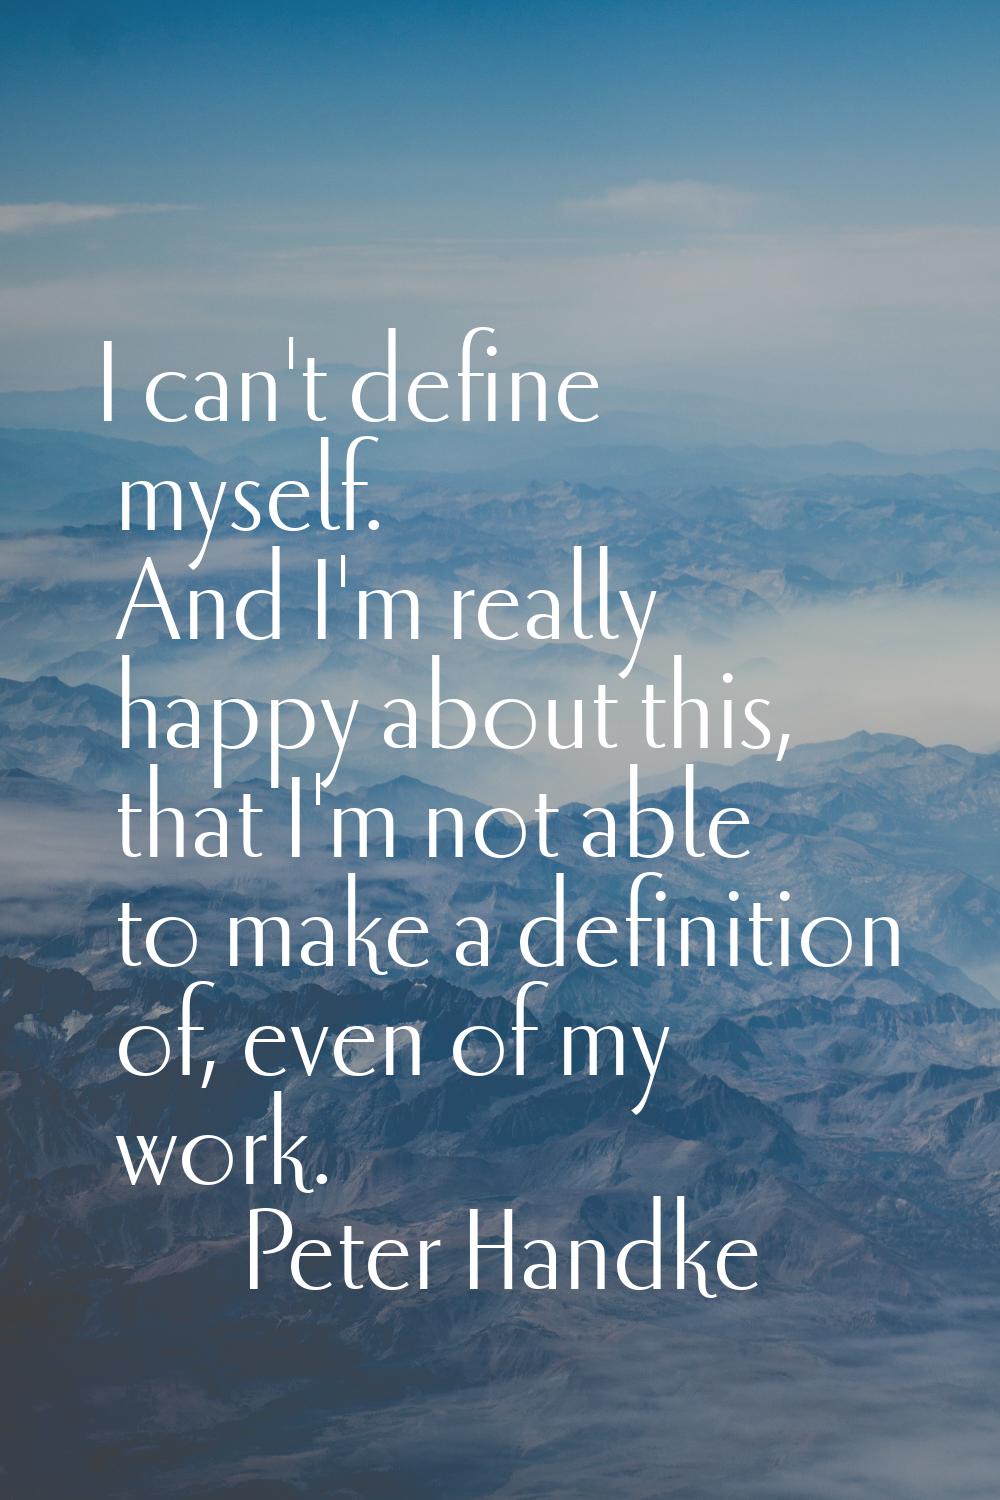 I can't define myself. And I'm really happy about this, that I'm not able to make a definition of, 